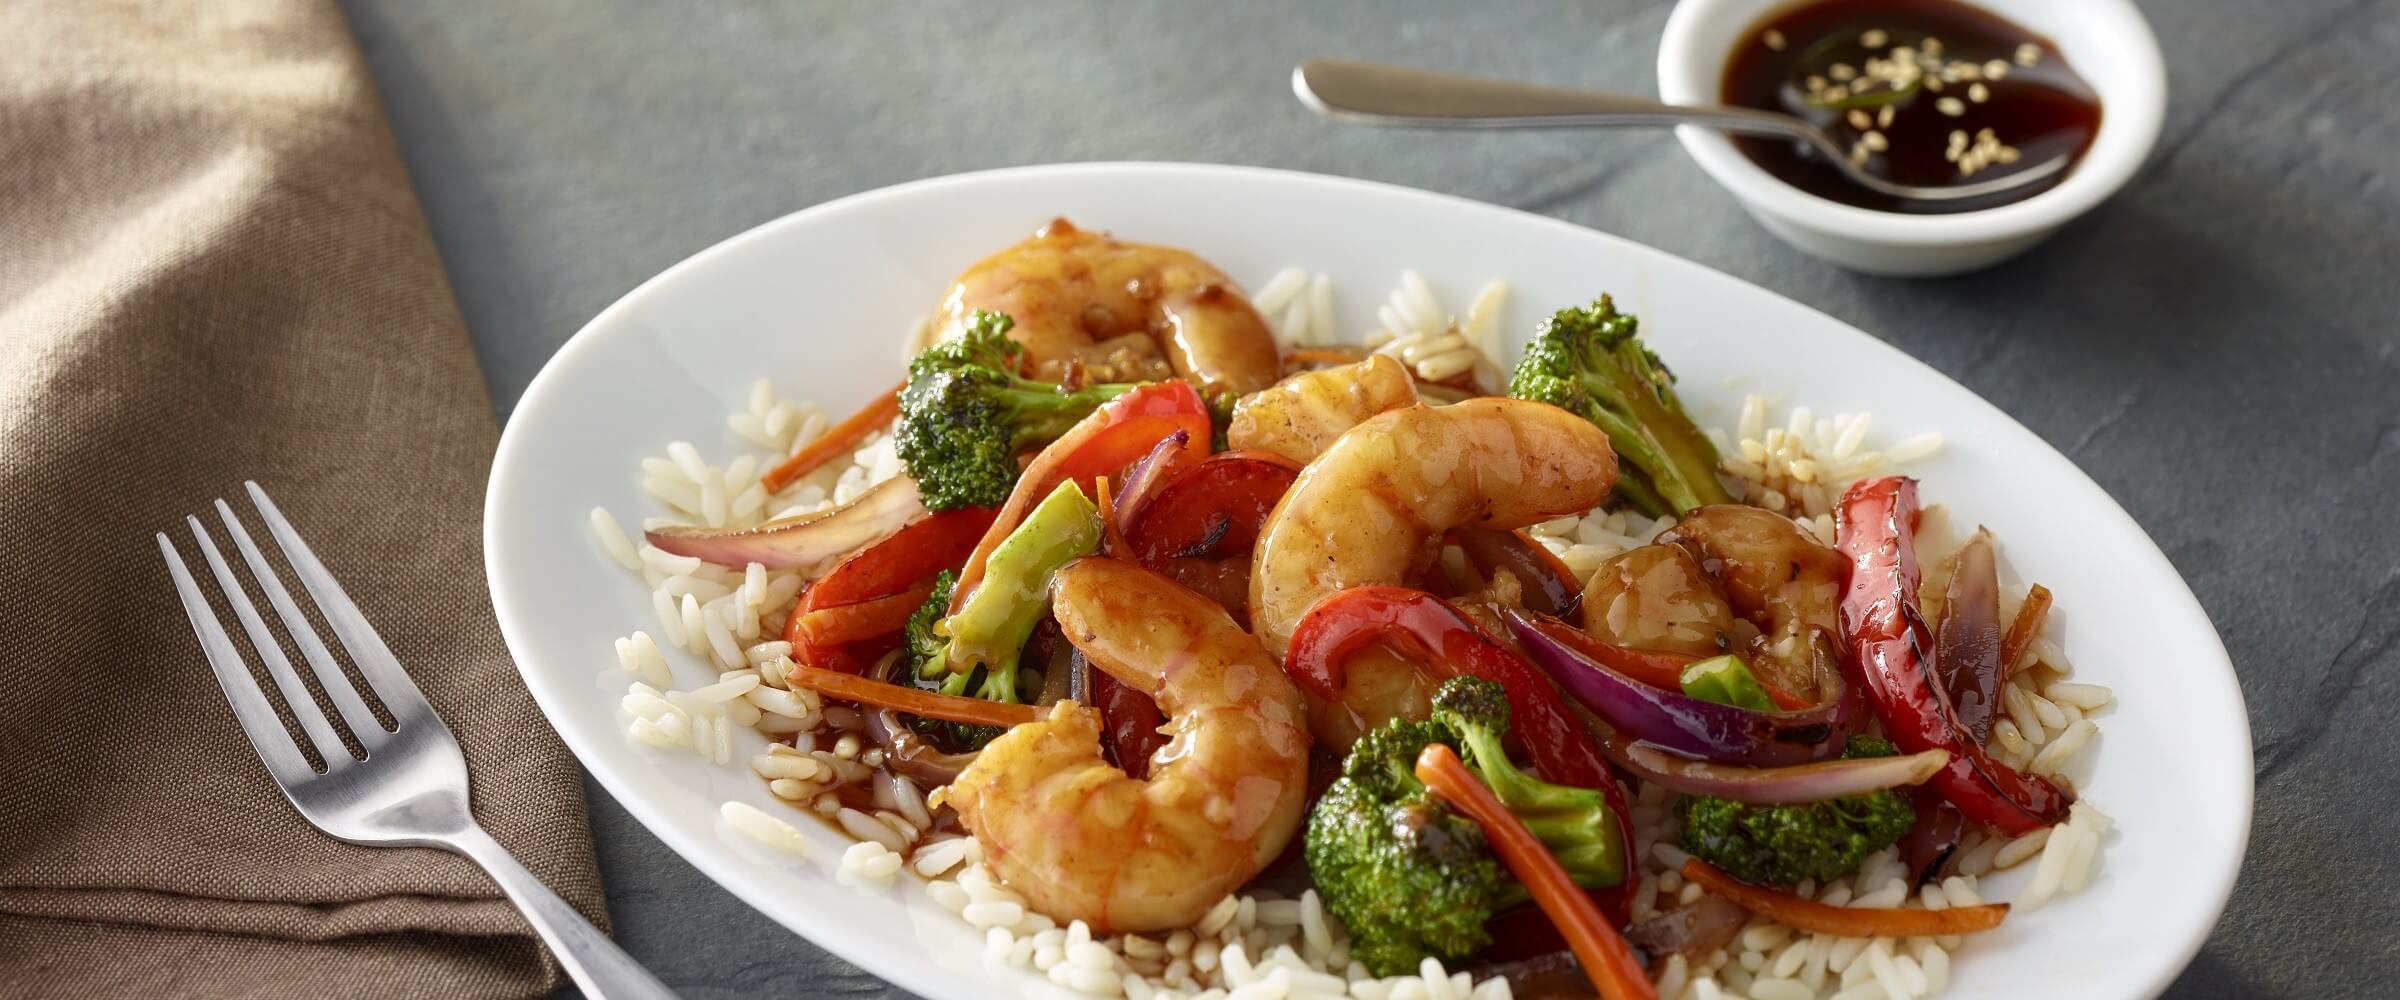 shrimp and broccoli stir fry over rice in white bowl with extra sauce on the side